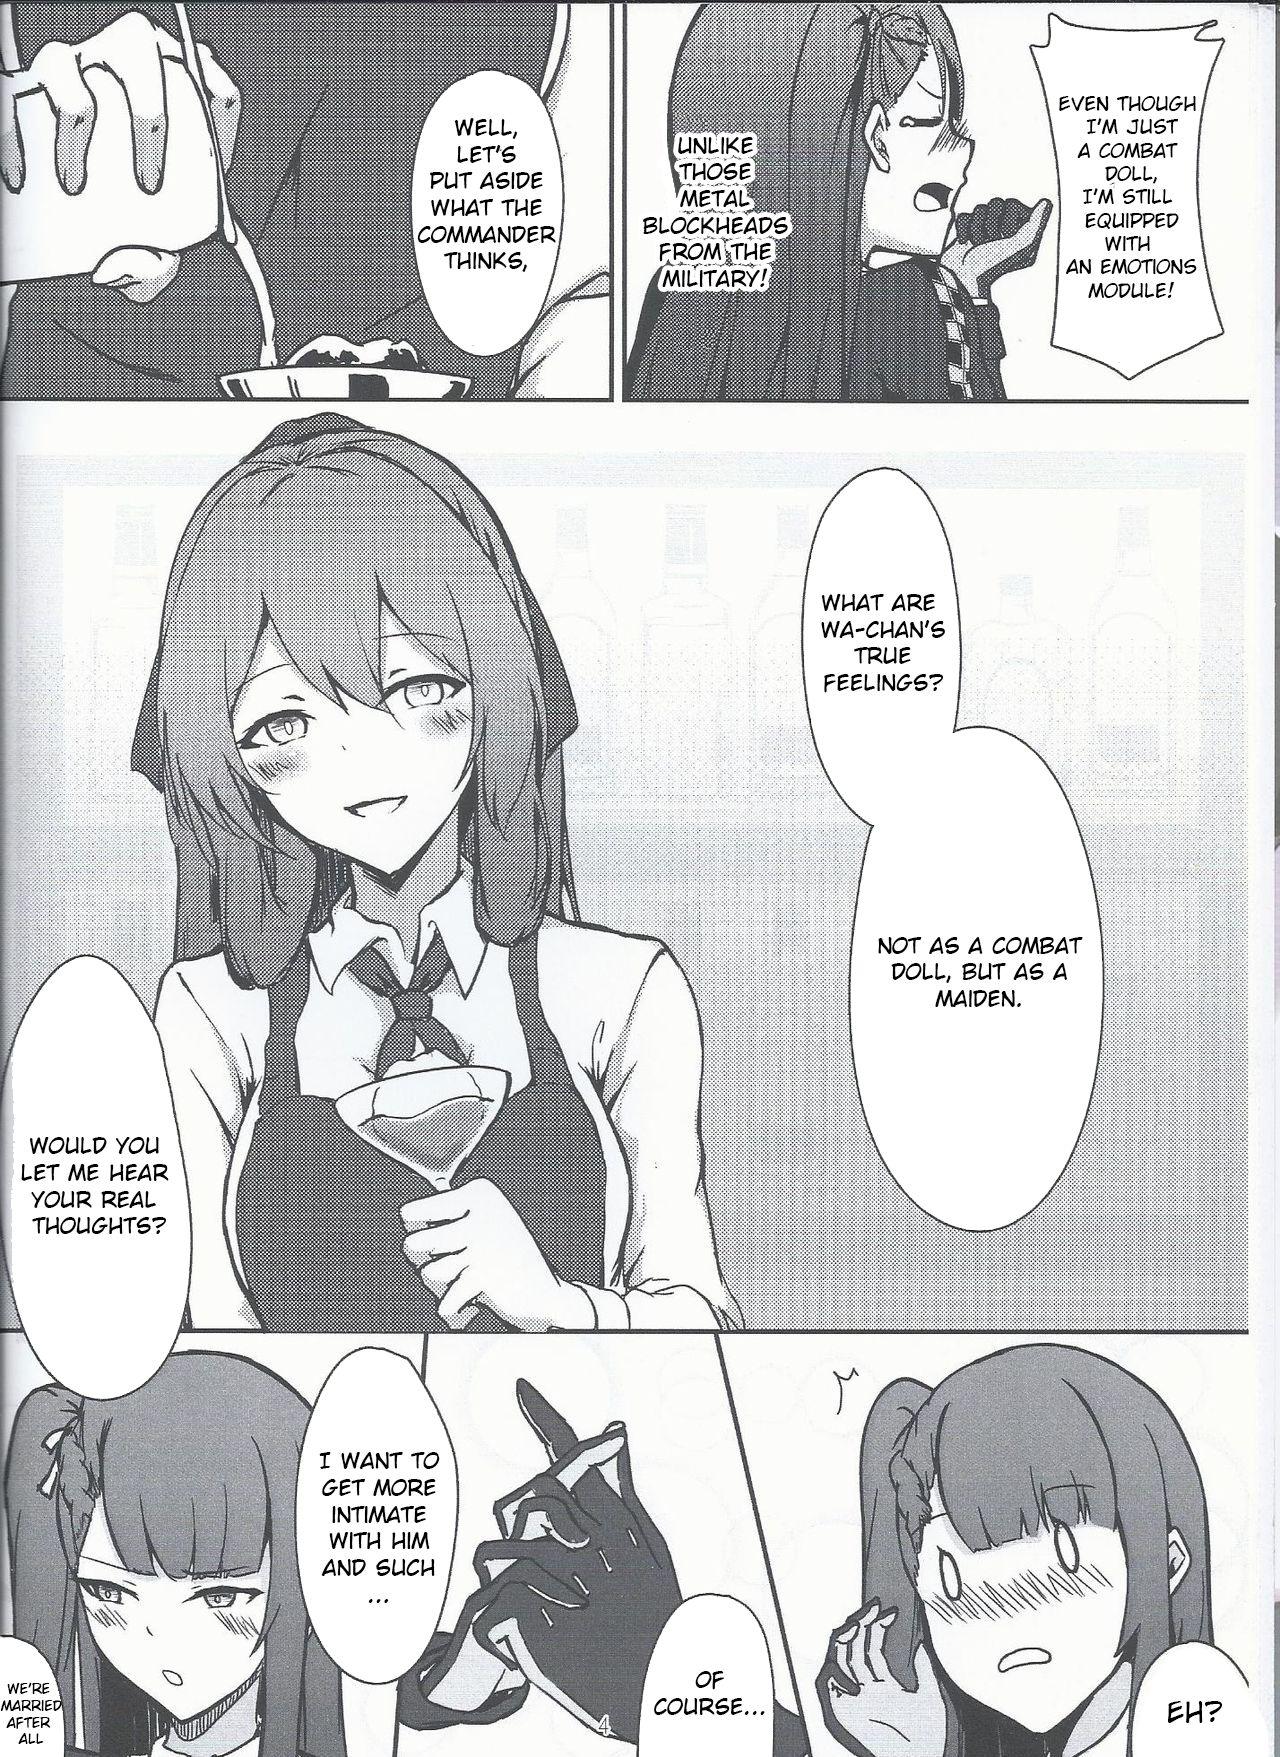 I don't know what to title this book, but anyway it's about WA2000 2